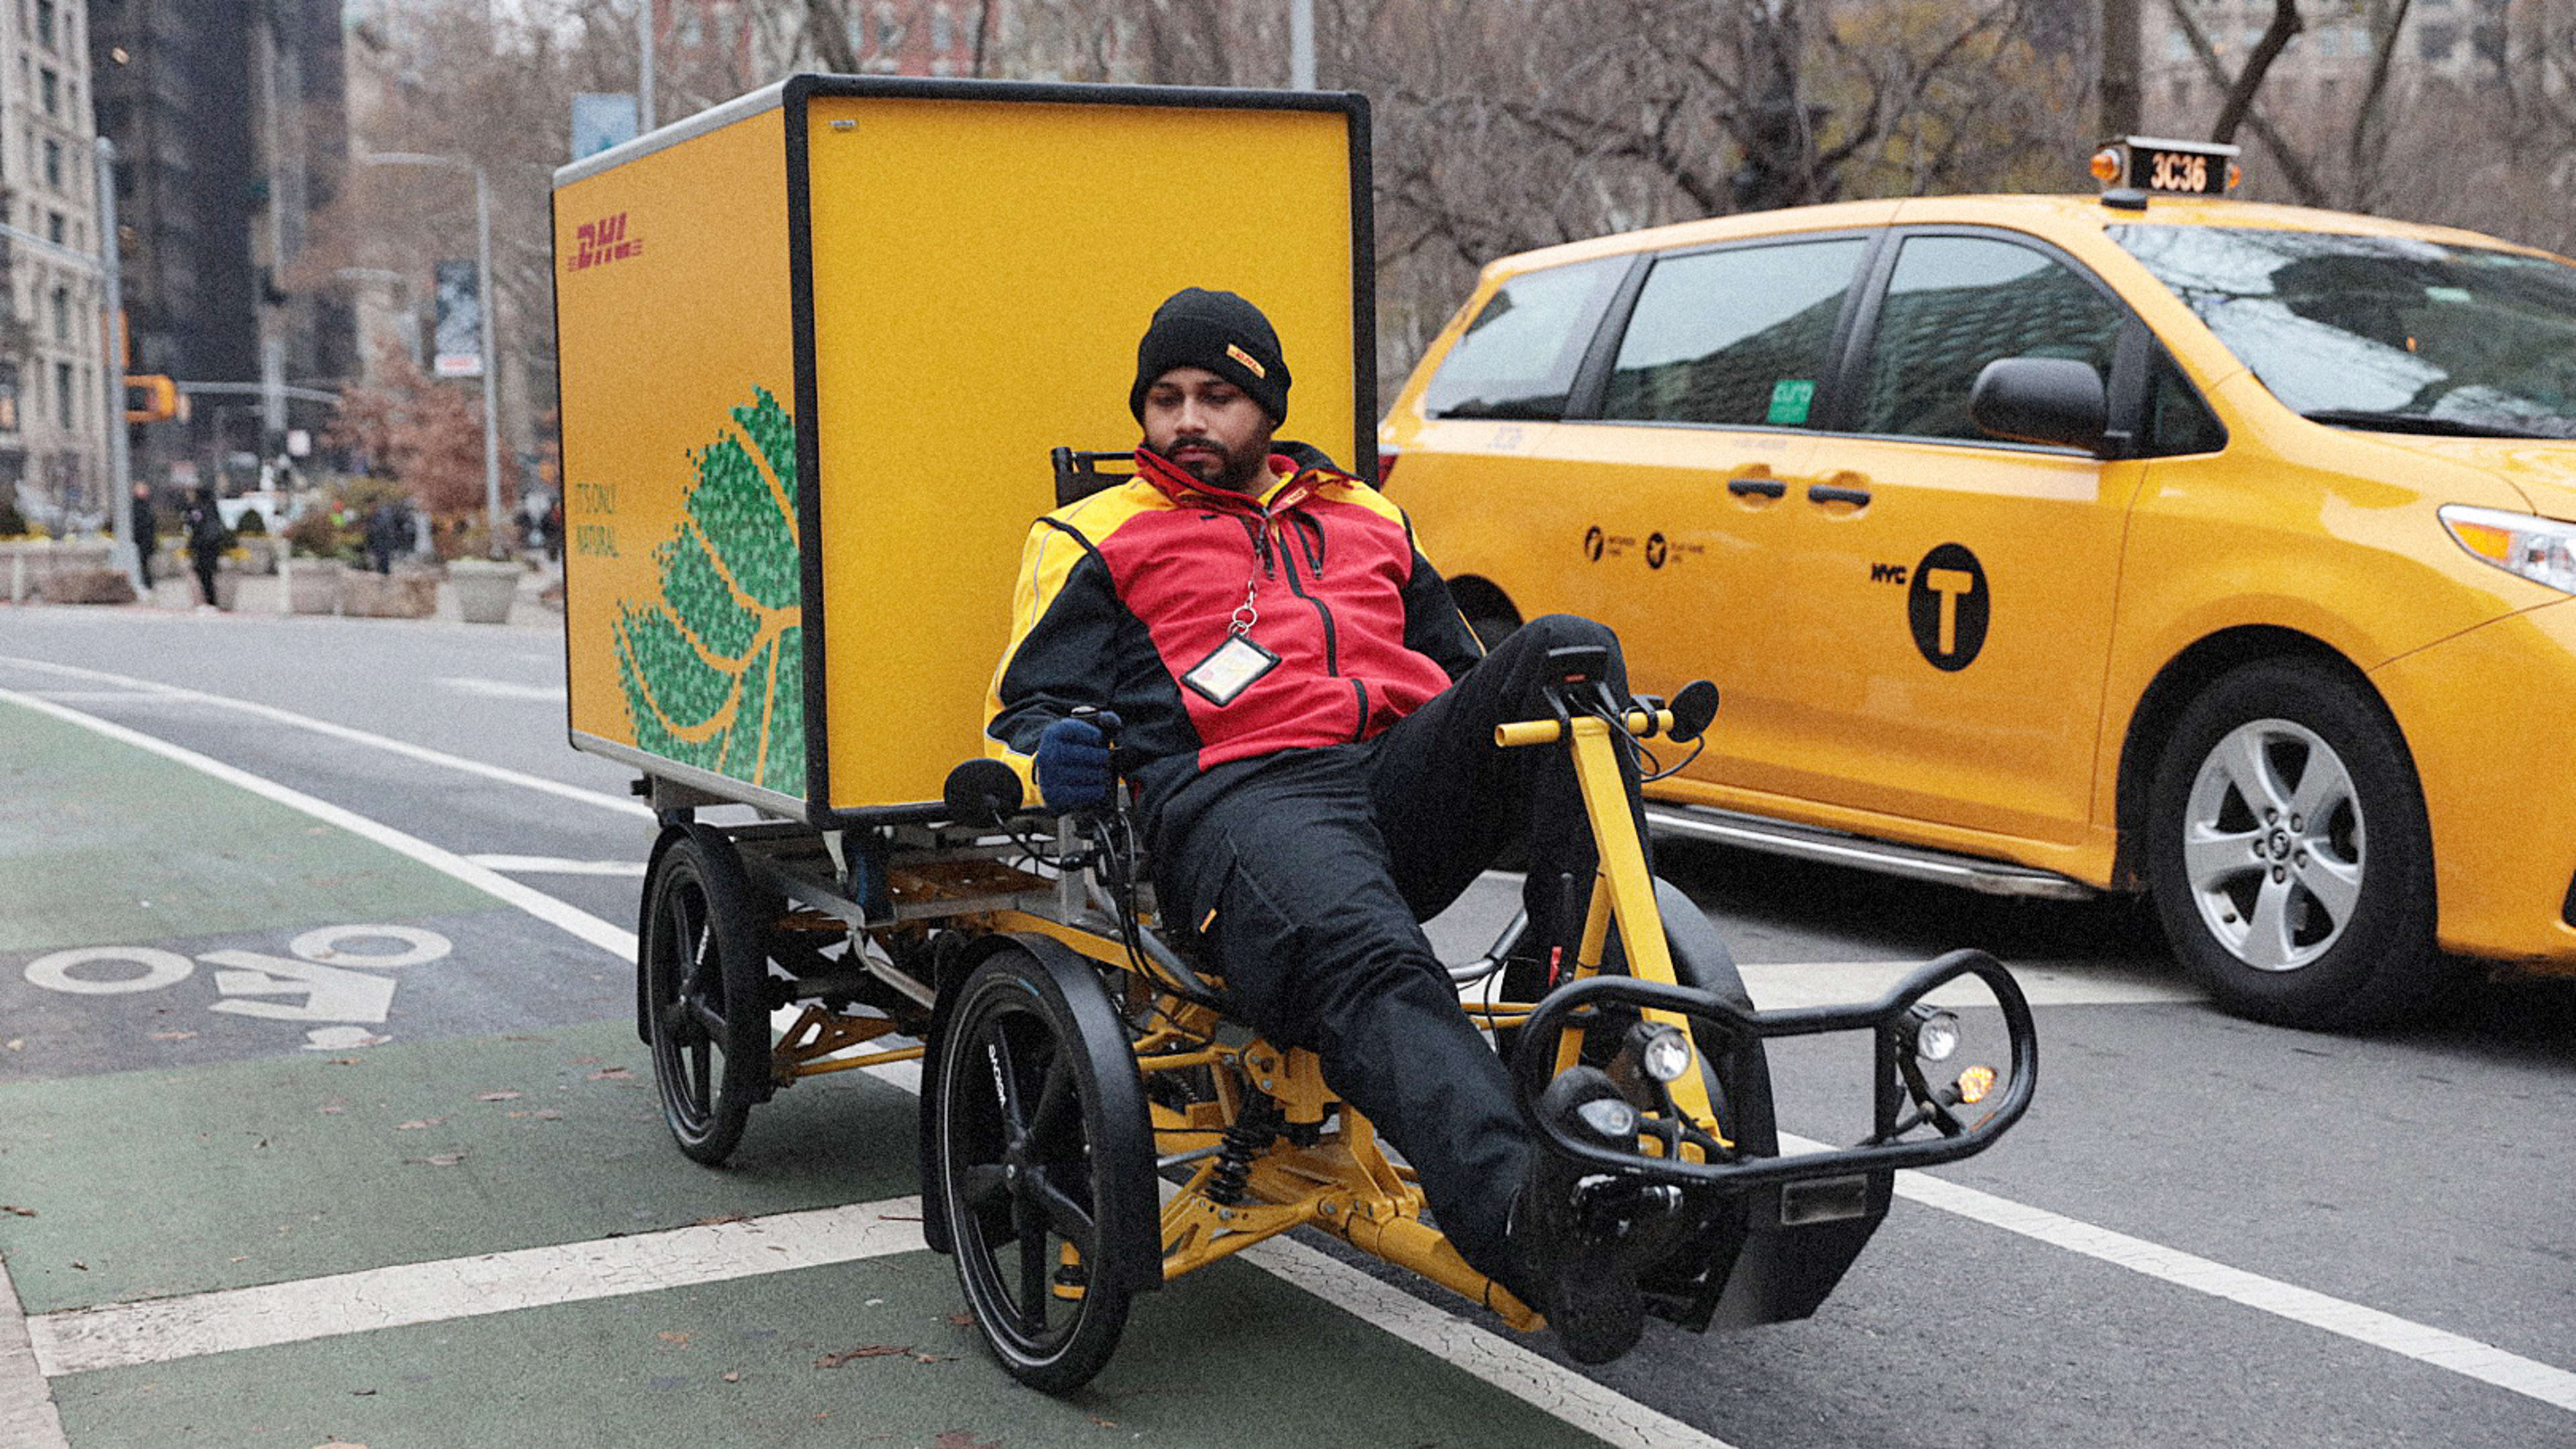 What will make cargo bike package delivery succeed in New York?